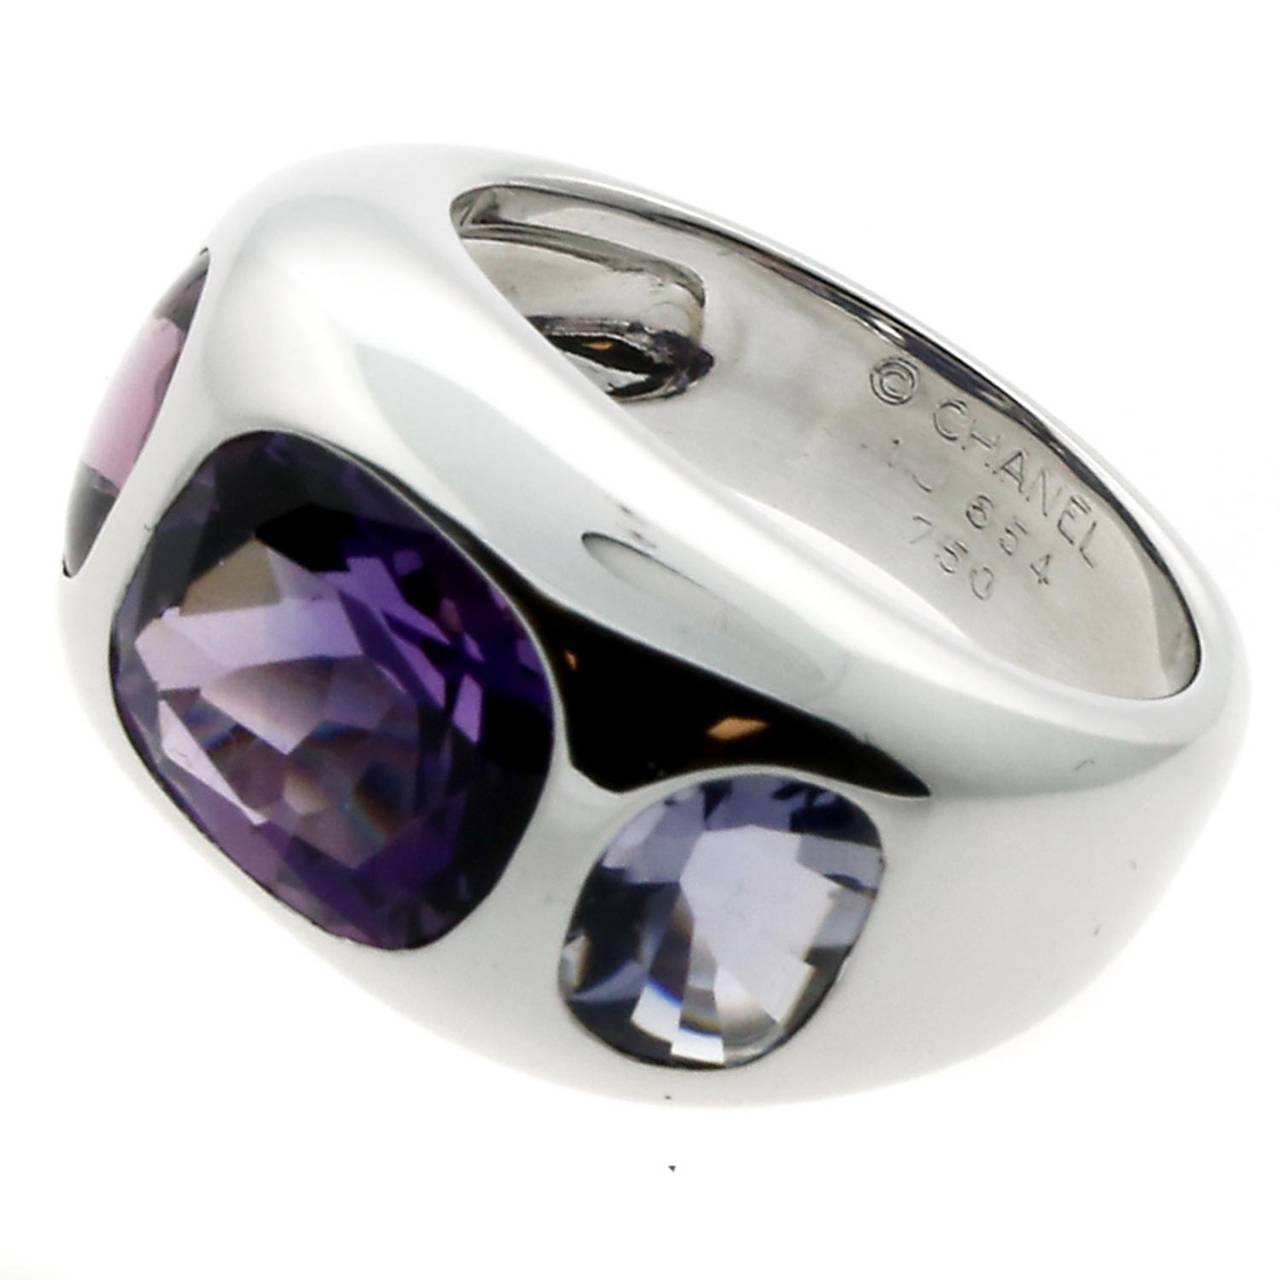 A fun authentic Chanel cocktail ring featuring vibrant tourmaline, amethyst, and iolite gemstones set in 18k white gold.

Size: US 4 1/4
Dimensions: The ring measures 10mm wide  (.39″ Inches)

Inventory ID: 0000025